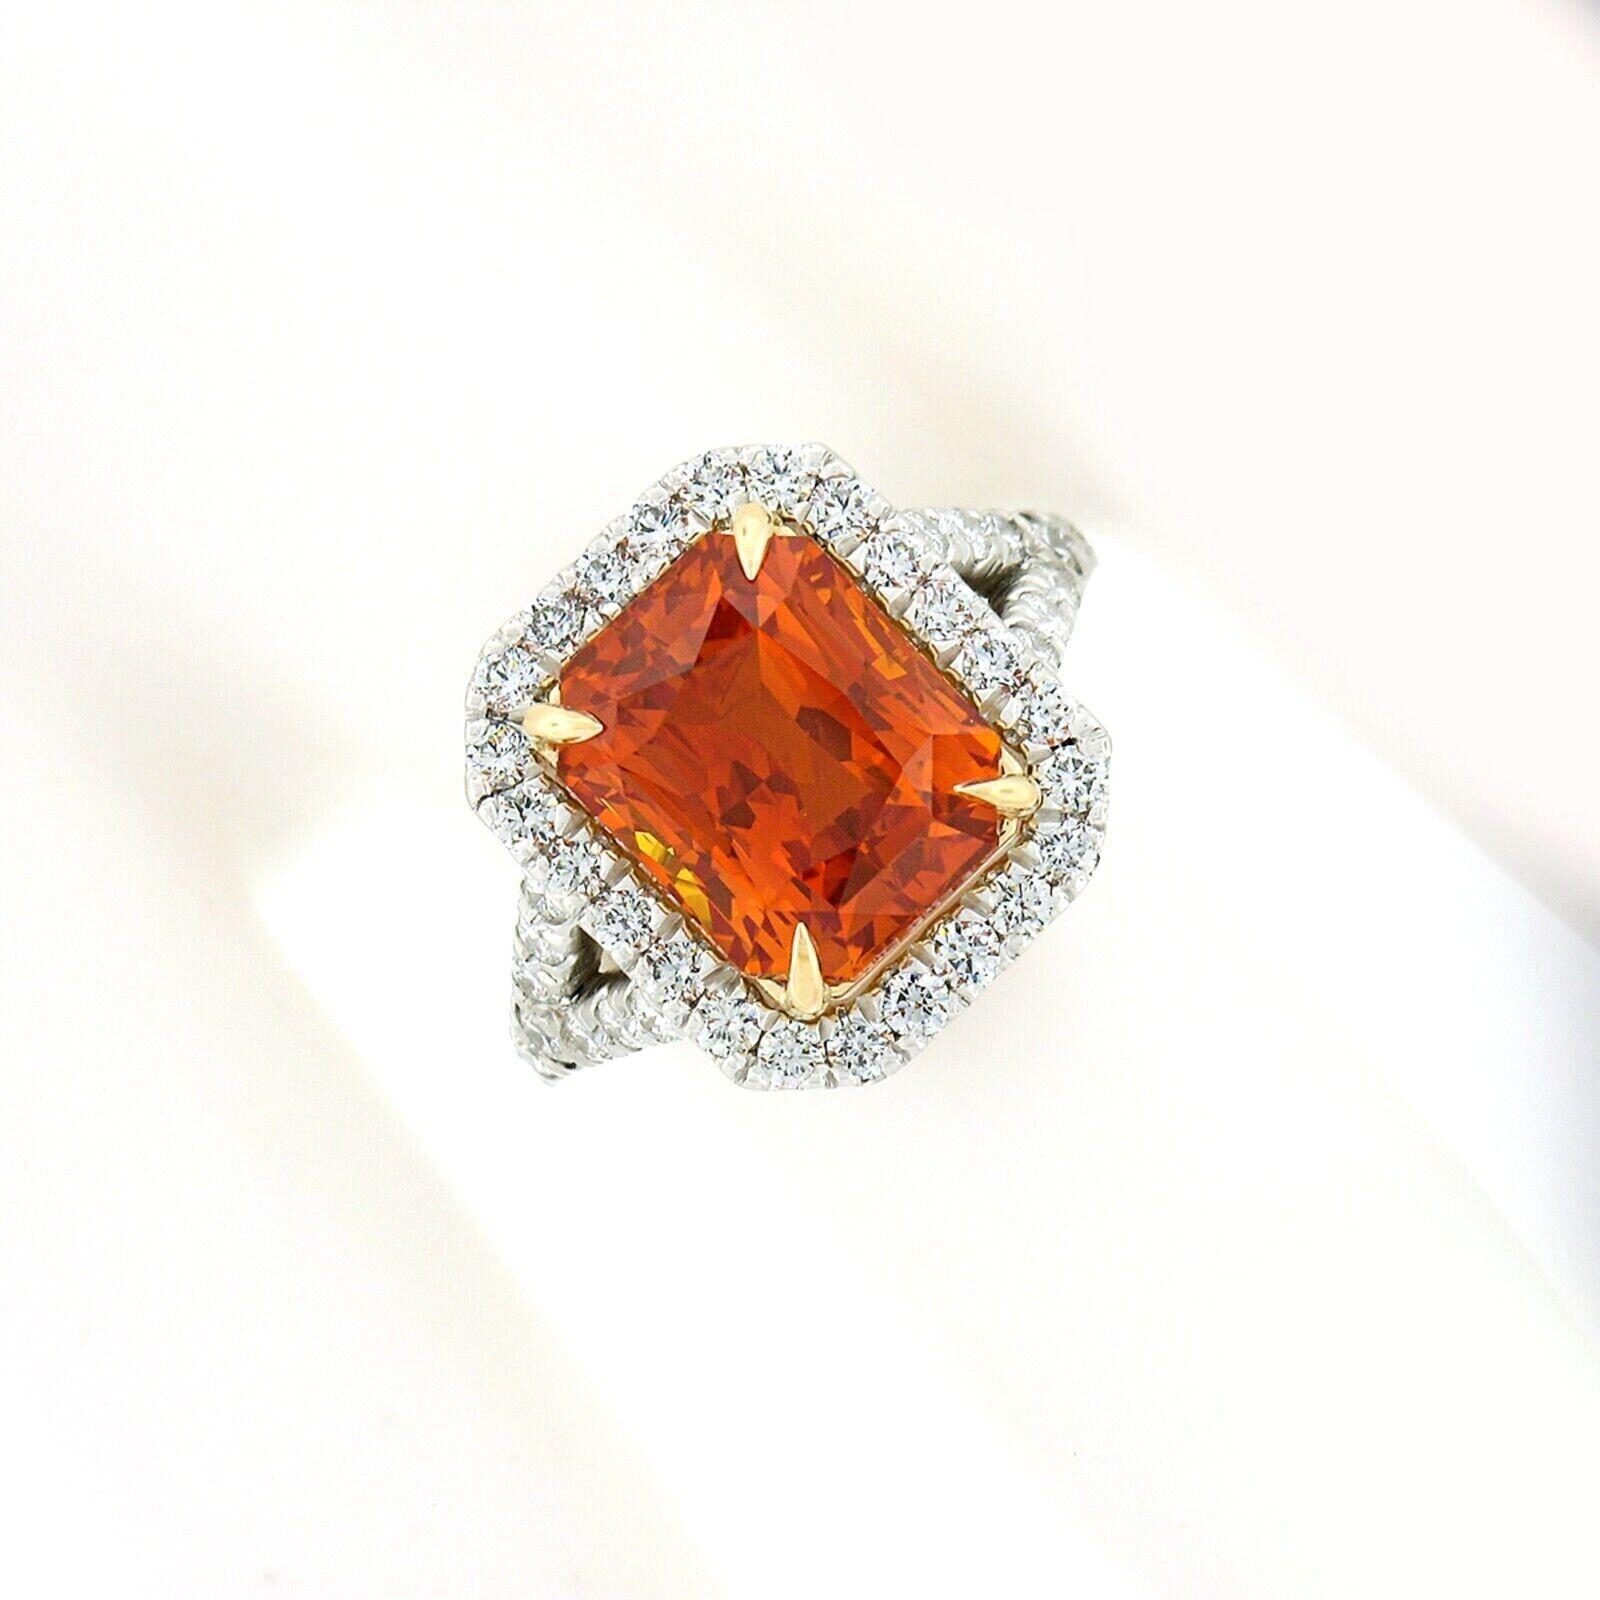 New Platinum & 18K Gold 7.78ct GIA Vivid Orange Sapphire & Diamond Cocktail Ring In New Condition For Sale In Montclair, NJ